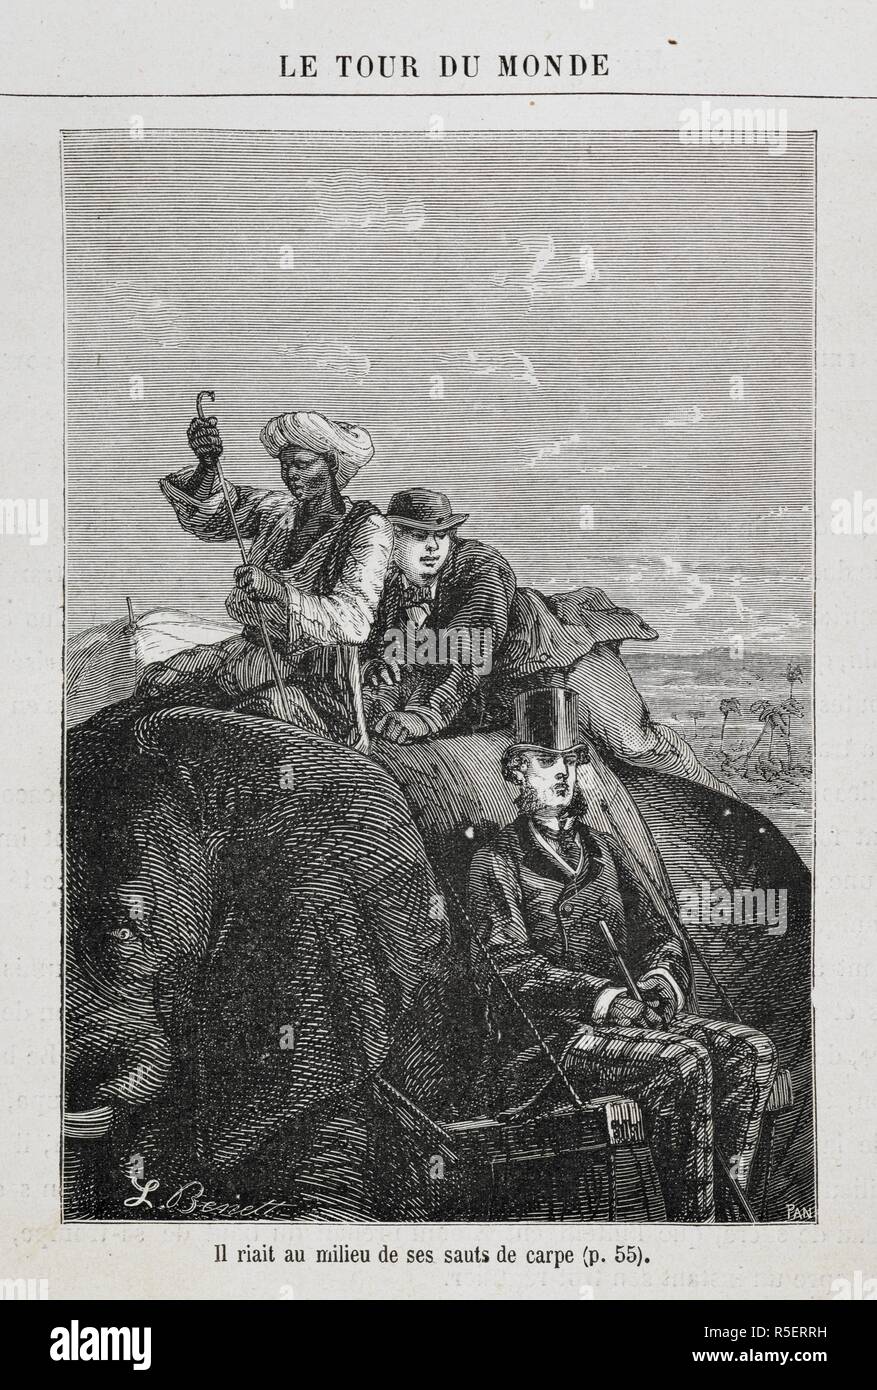 Phileas Fogg and Jean Passepartout, riding an elephant in India, with a hired guide. An illustration to 'Around the World in Eighty Days'. [Le Tour du Monde en quatre-vingts jours. [A novel.] (HuitieÌ€me eÌdition.)] [Around the World in 80 Days]. Paris, [1873]. Source: 12514.l.18 page 56. Author: VERNE, JULES. De Neuville, M. M. Stock Photo